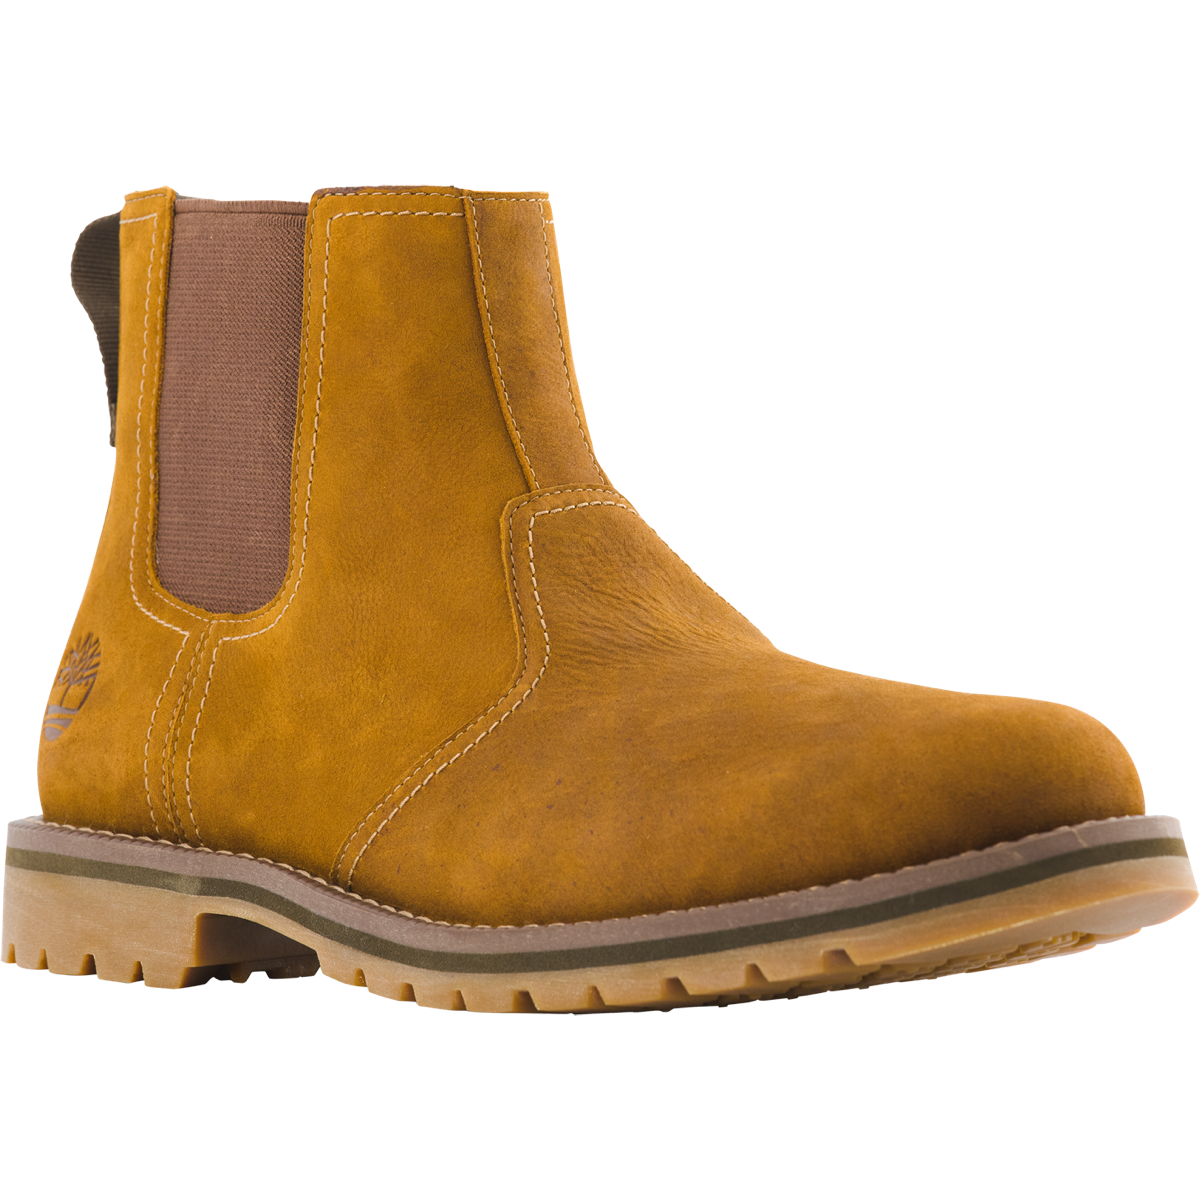 Timberland Larchmont II Chelsea Men's Boots | Wheat (Model TB 0A5SBV231)